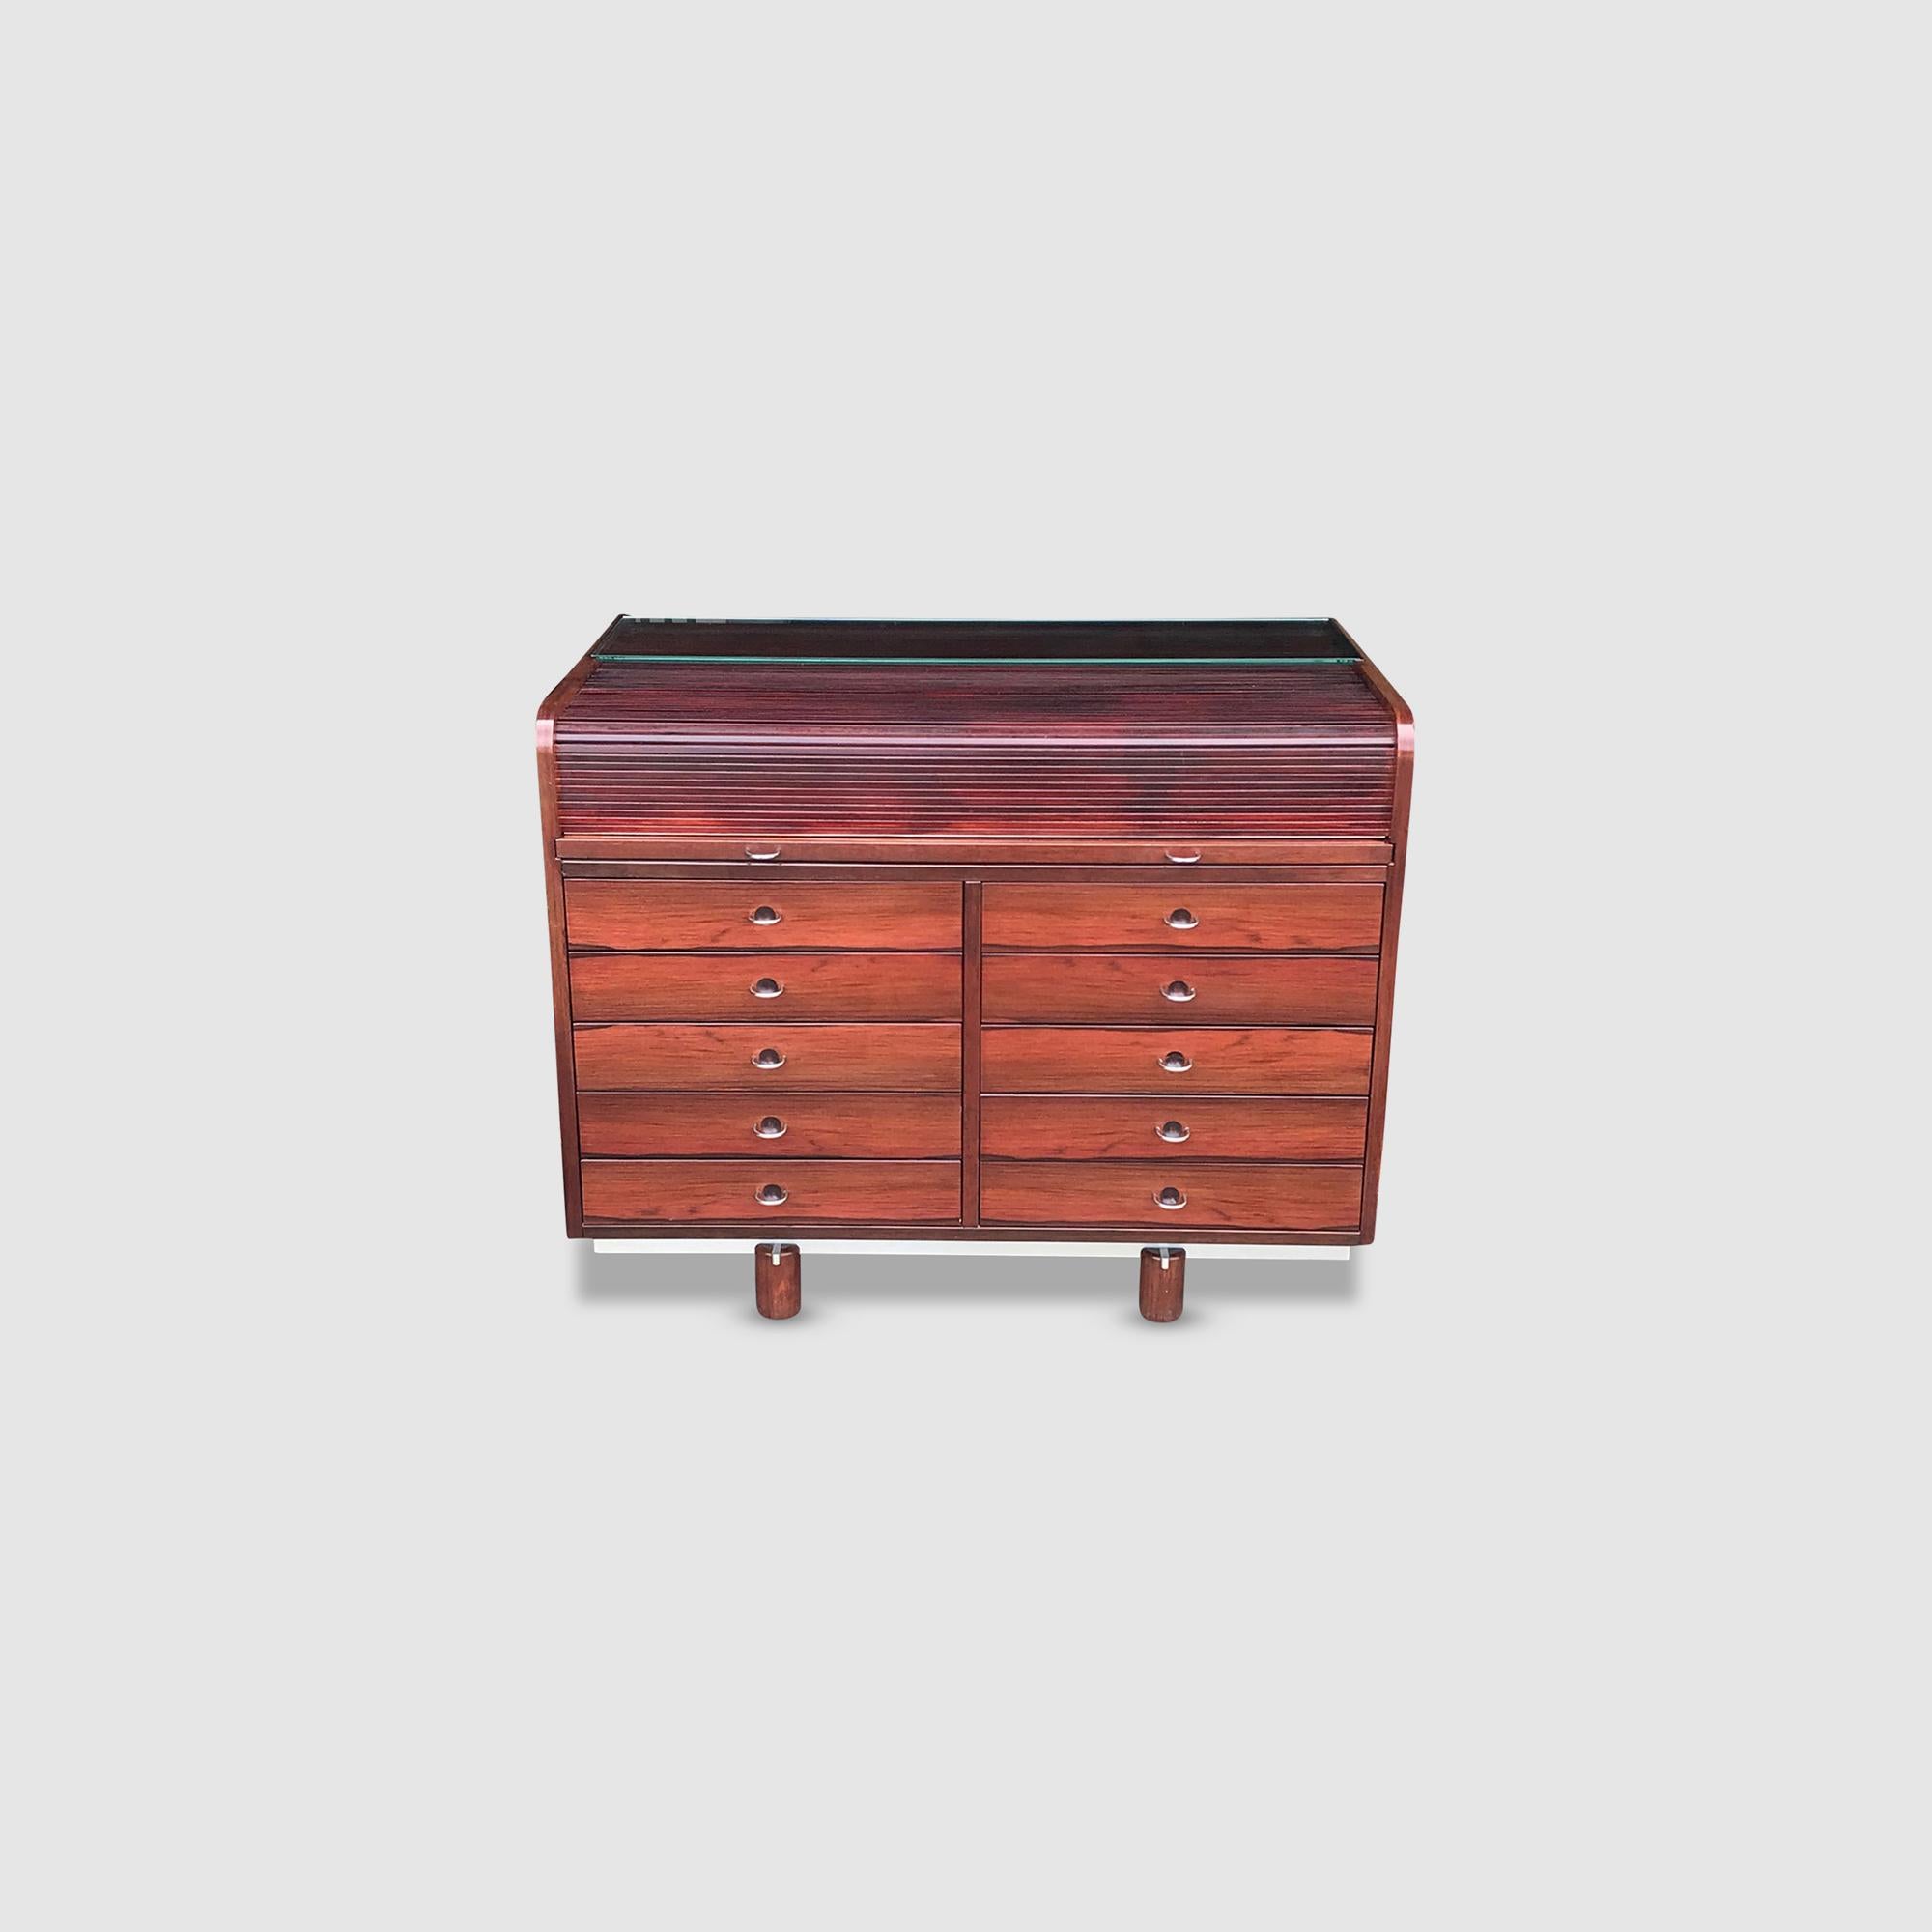 Rare roll-top desk model 804 designed by Gianfranco Frattini and manufactured by Bernini, Italy 1960s. The desk is made of rosewood veneer and has a remarkable design.

The piece can be used as a desk, and as a small cabinet at the same time.

The